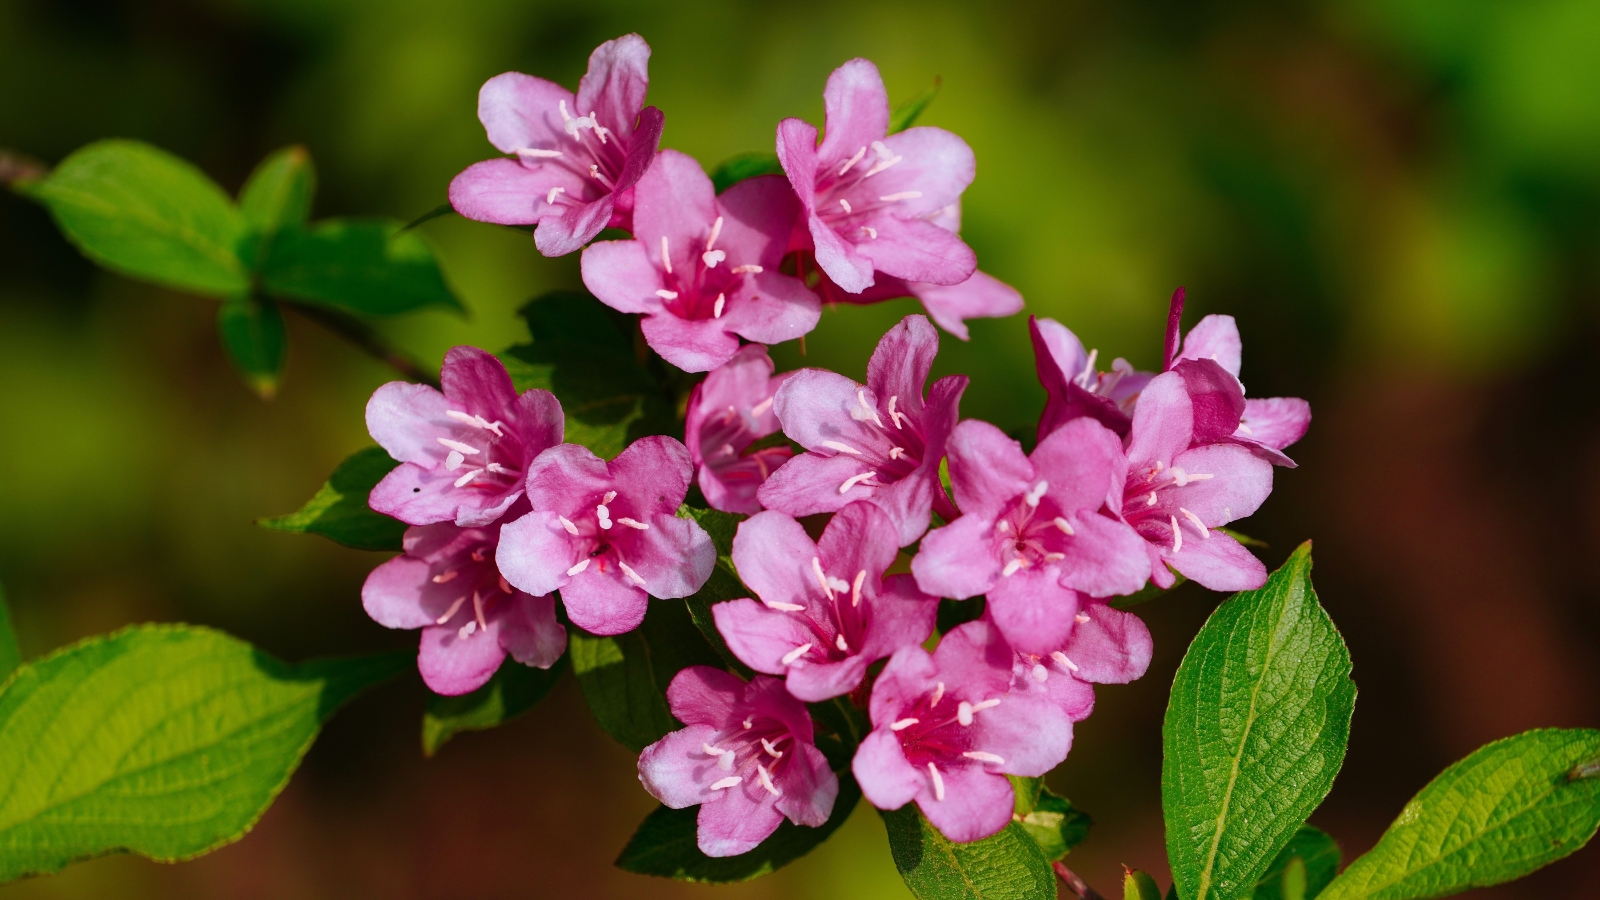 'Pink Poppet' weigela blooms up close, showcasing delicate pink petals against lush green leaves, illuminated by the warm rays of sunlight, creating a picturesque scene of natural beauty.